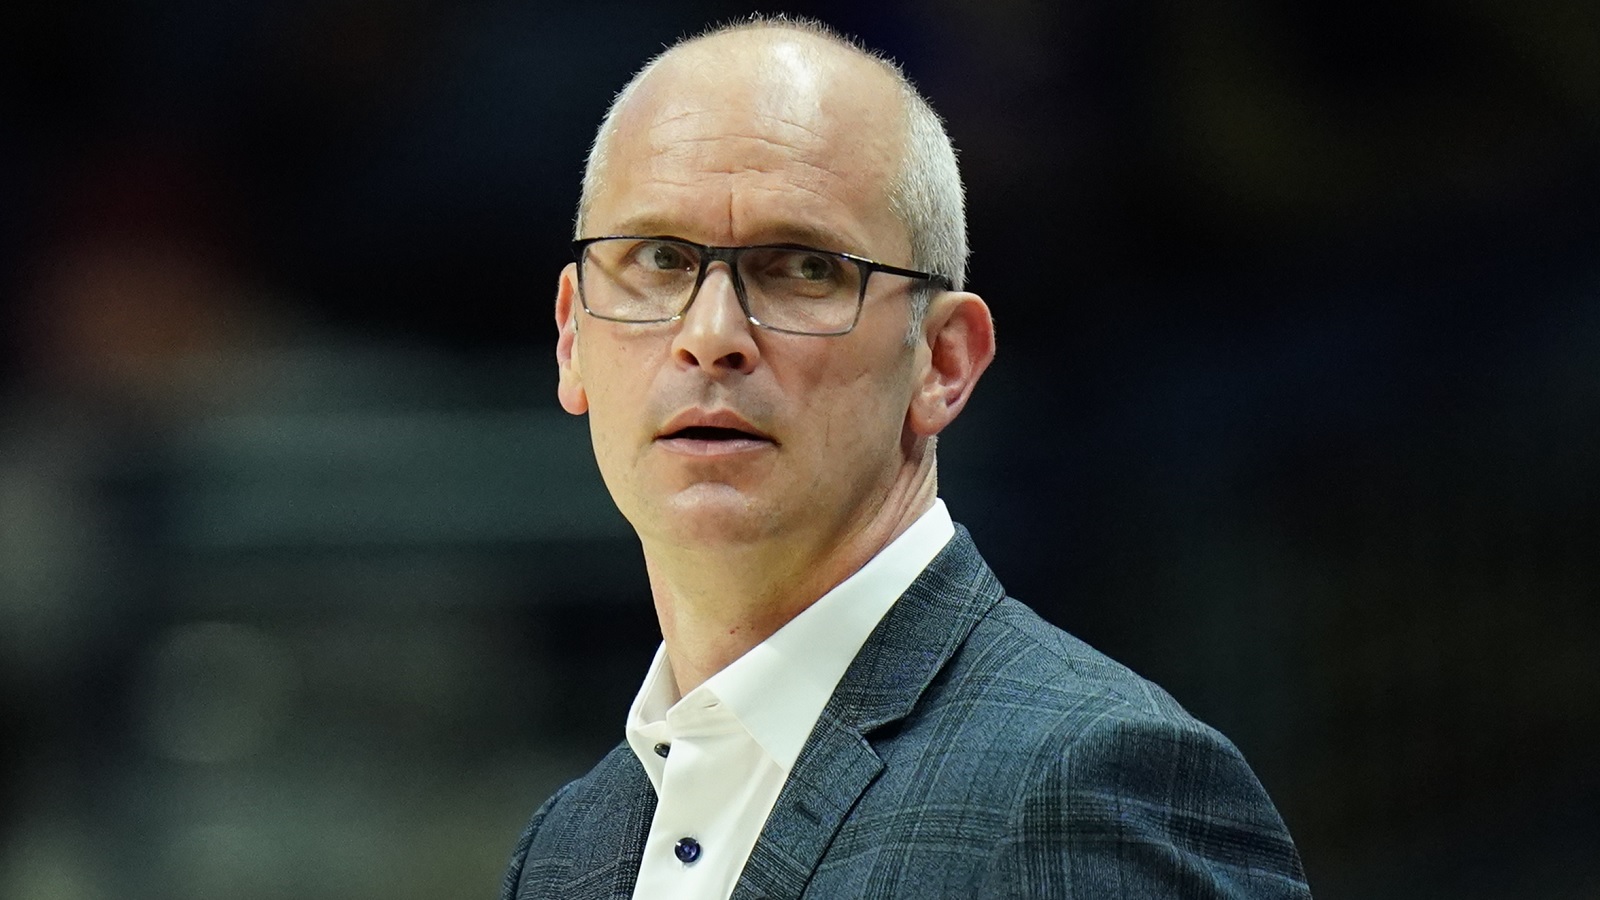  Big Moves Ahead: Will Dan Hurley Take the Reins of the Lakers This Weekend?